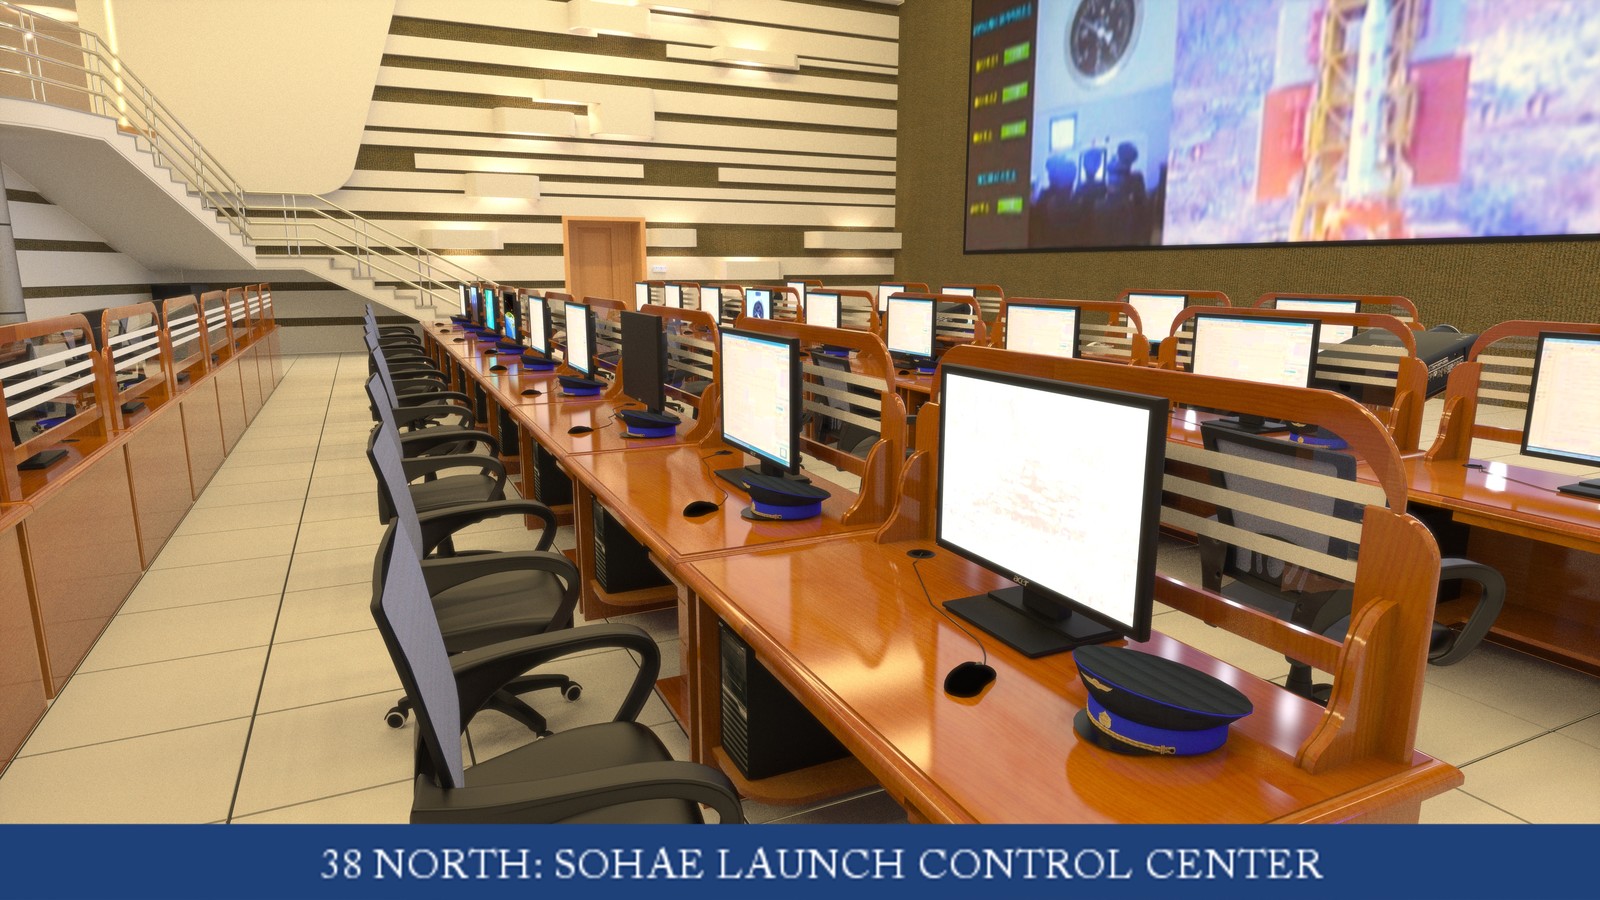 Sohae Satellite Launching Station's Launch for 38 North
Control Room 03
Model by Nathan J Hunt/Edited &amp; Rendered by Duane Kemp
Project for 38North

Read the story here:
http://www.kemppro.com/KP-3D-Sohae-Launch-Control-Room-WIRED-Magazine.html 